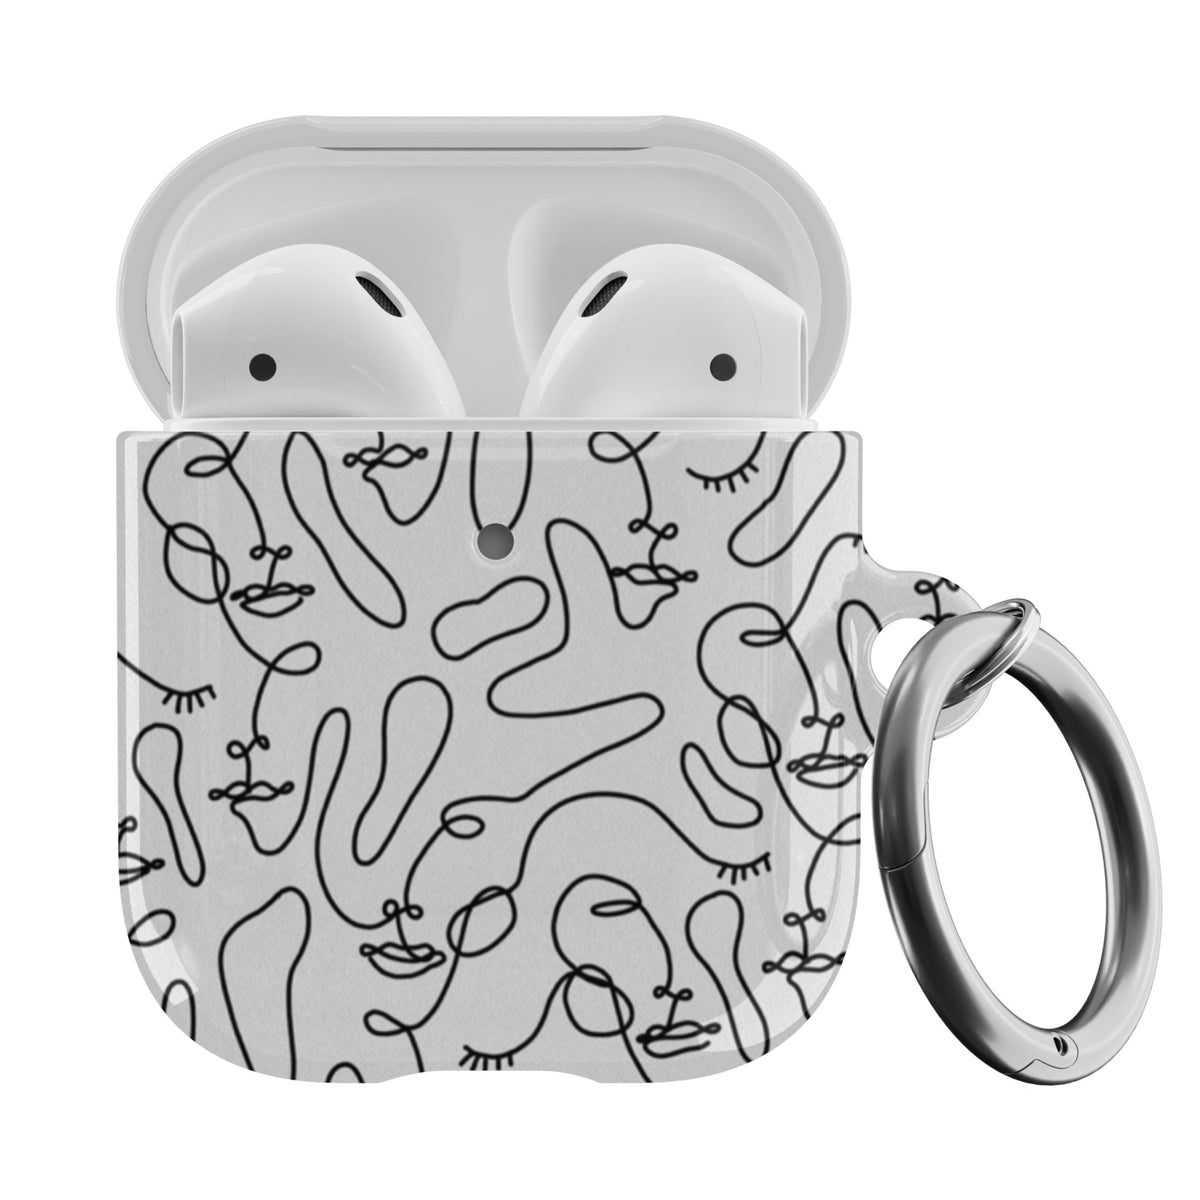 Bold Abstract Shape Outlines AirPod Cases